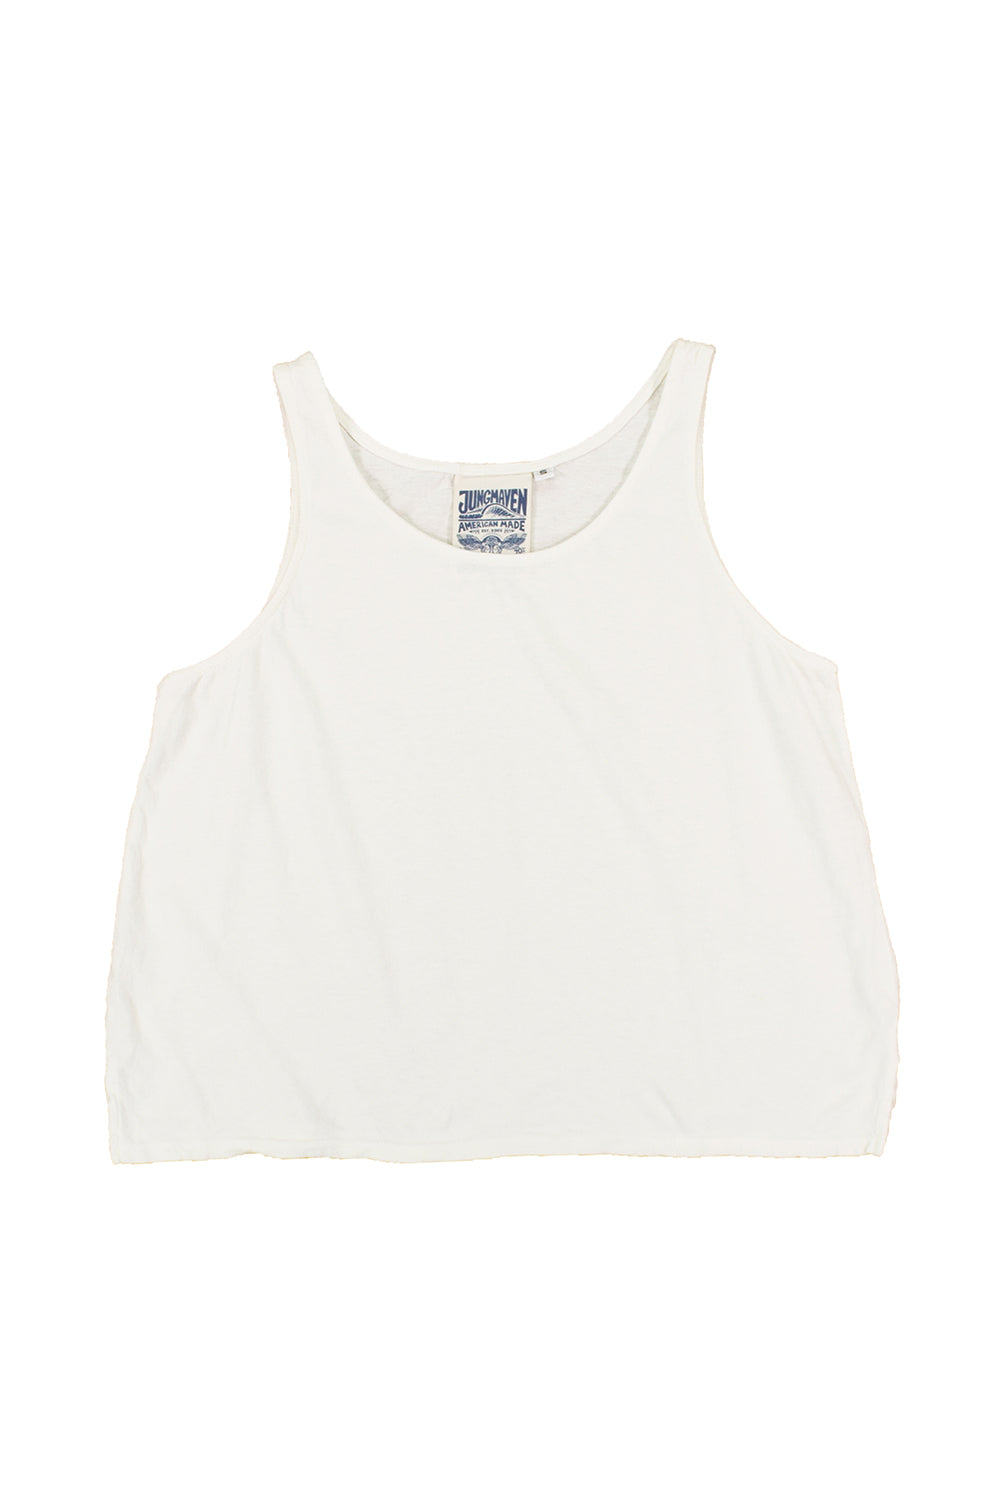 Trinity Tank | Jungmaven Hemp Clothing & Accessories / Color: Washed White